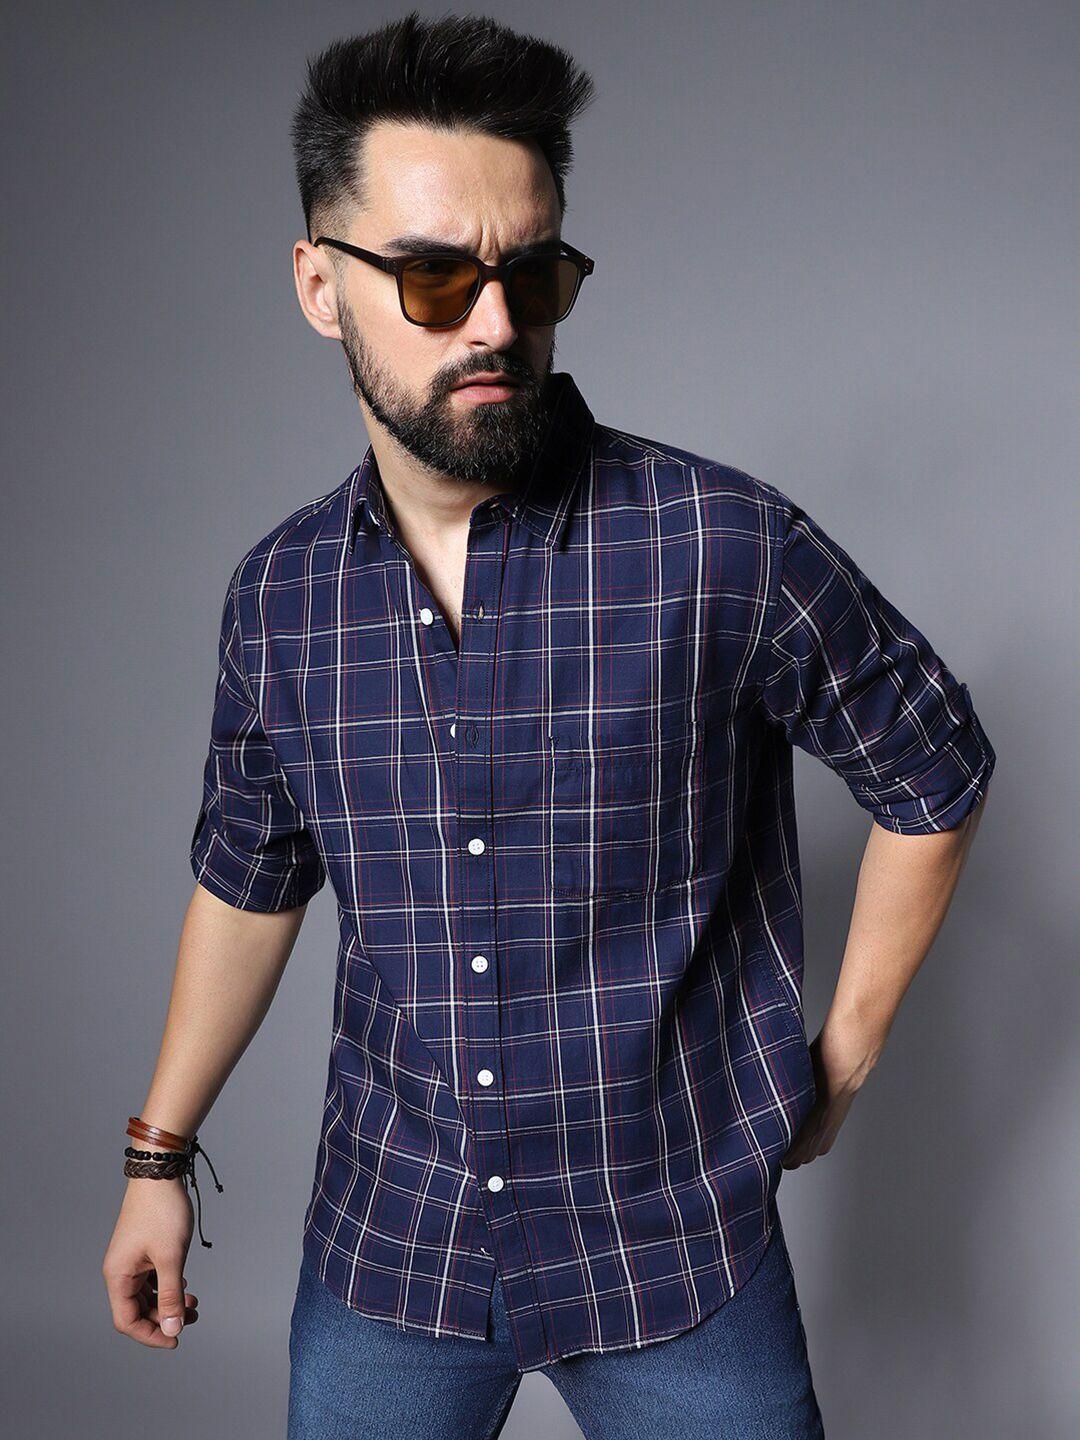 high-star-classic-checked-roll-up-sleeves-pure-cotton-casual-shirt